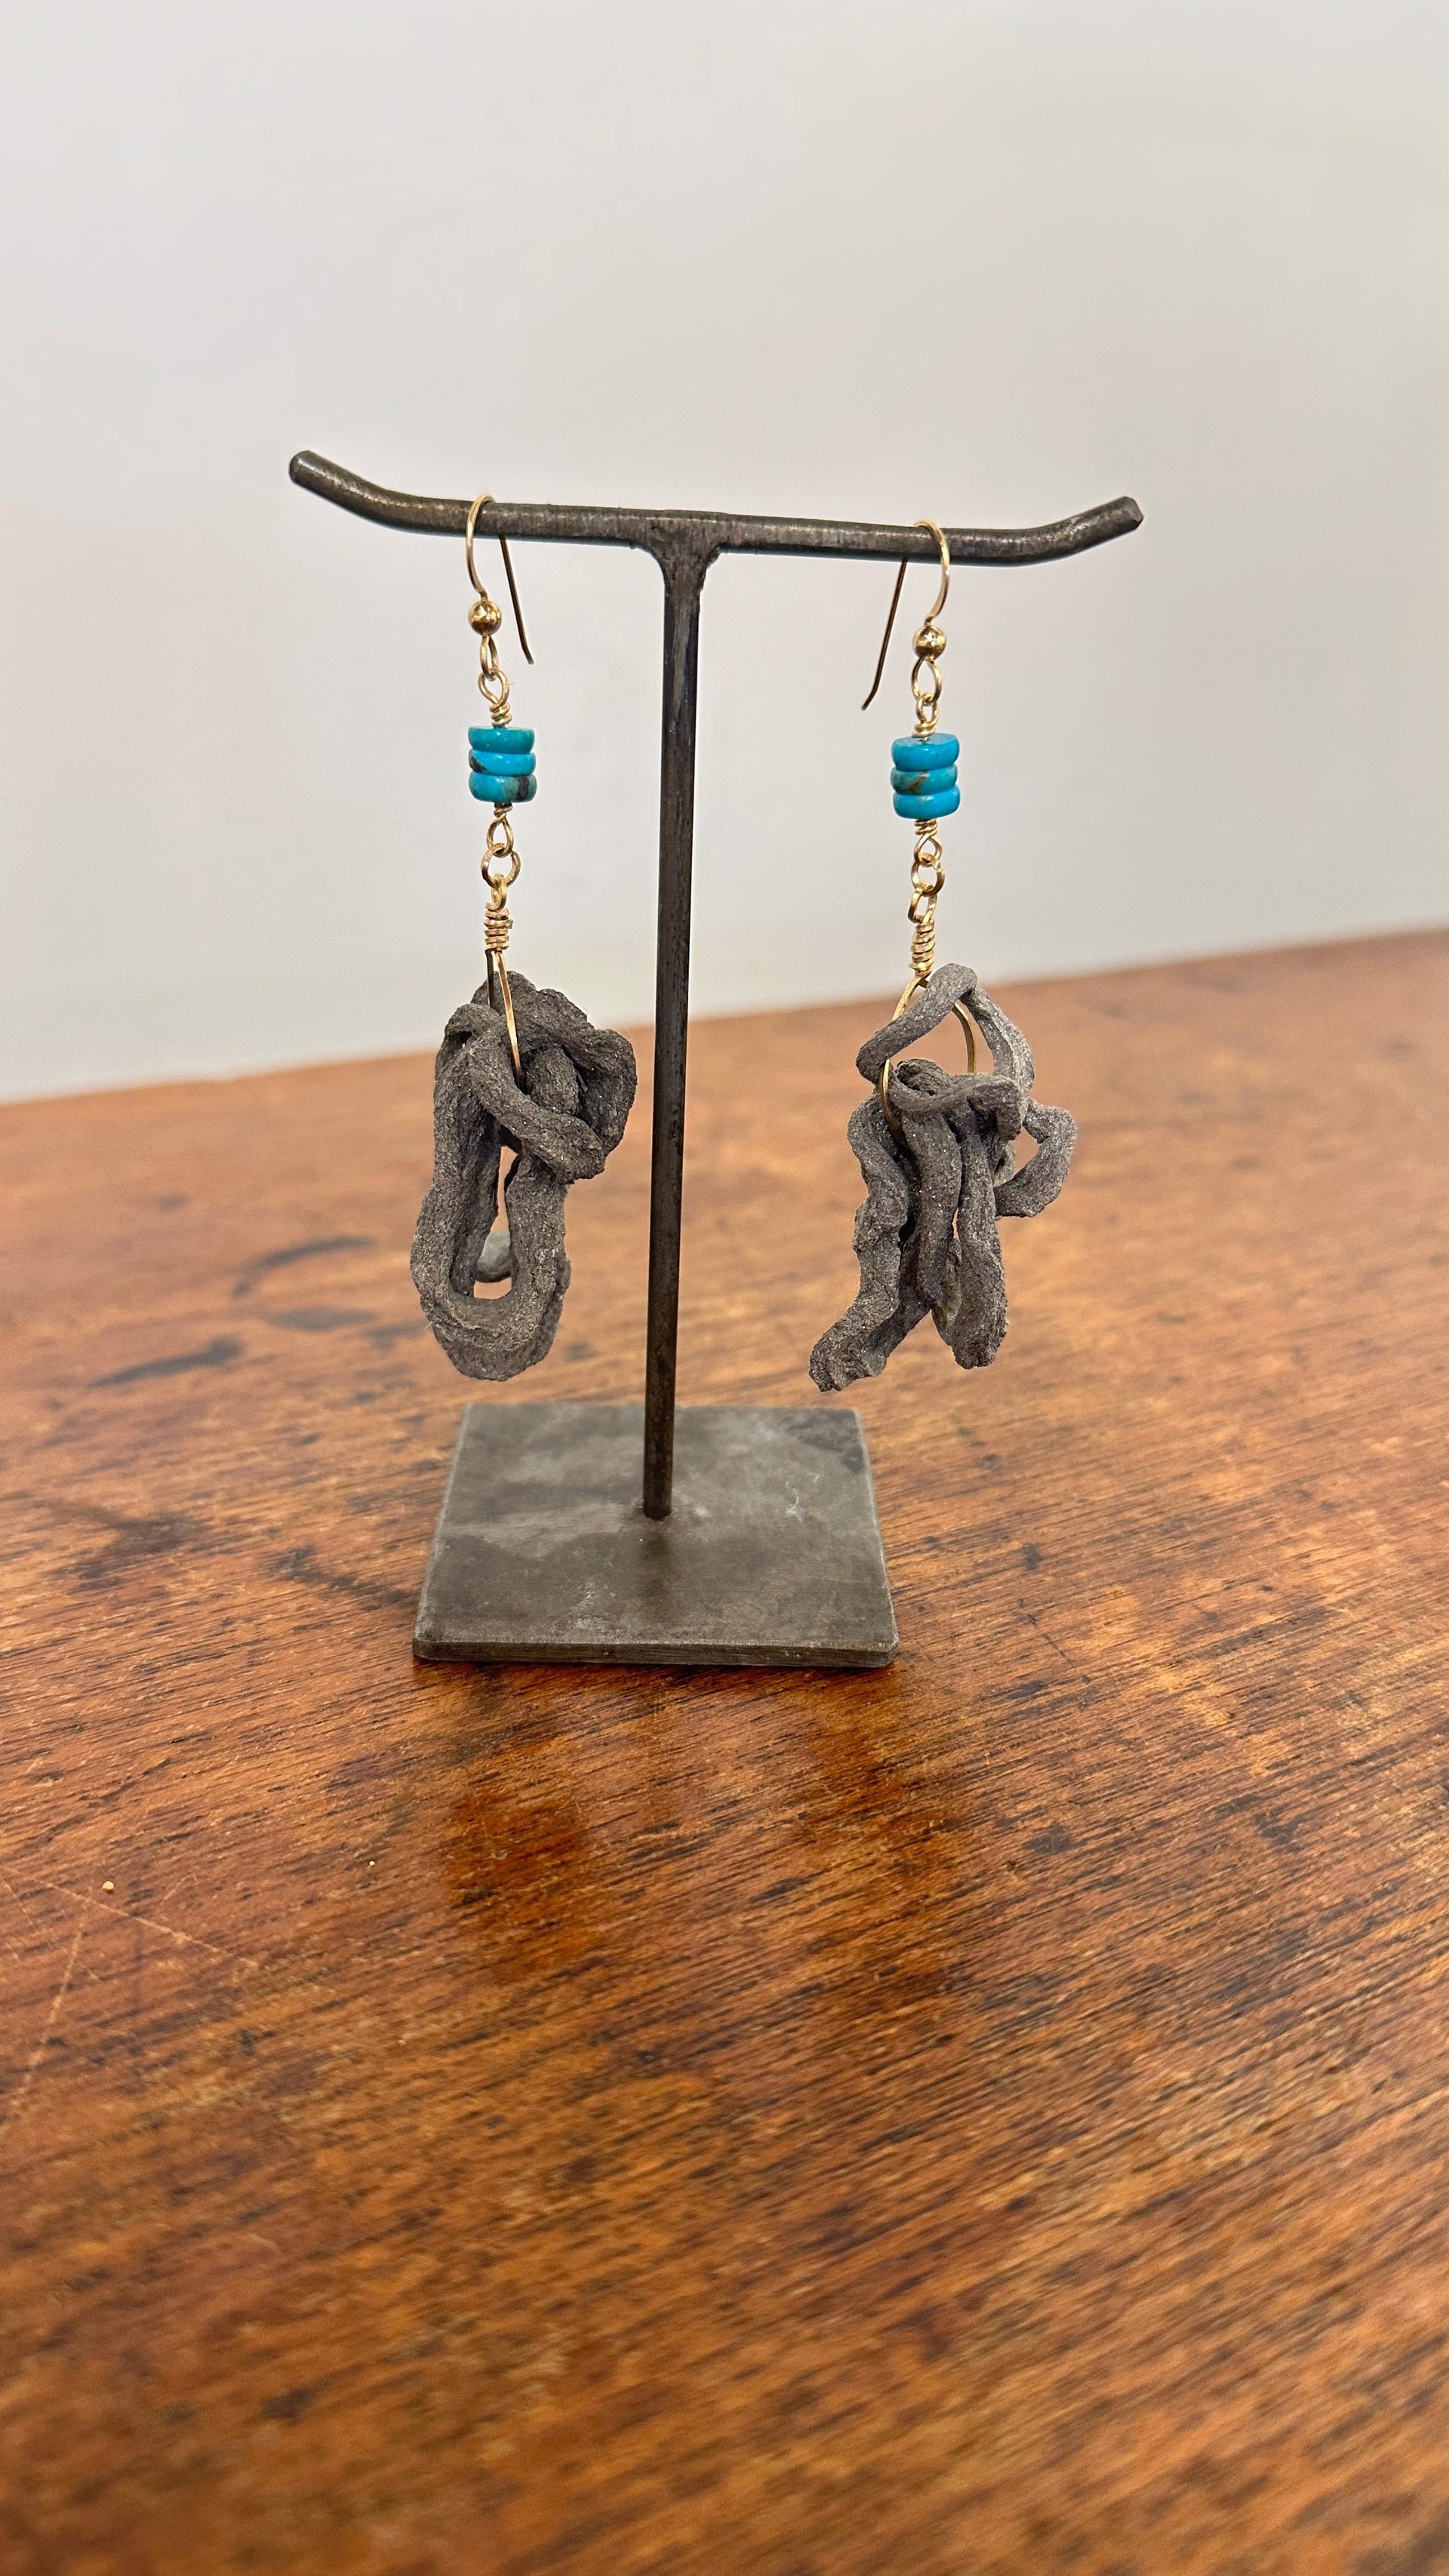 Paper Link and Turquoise Earrings by Sabrina Farrell